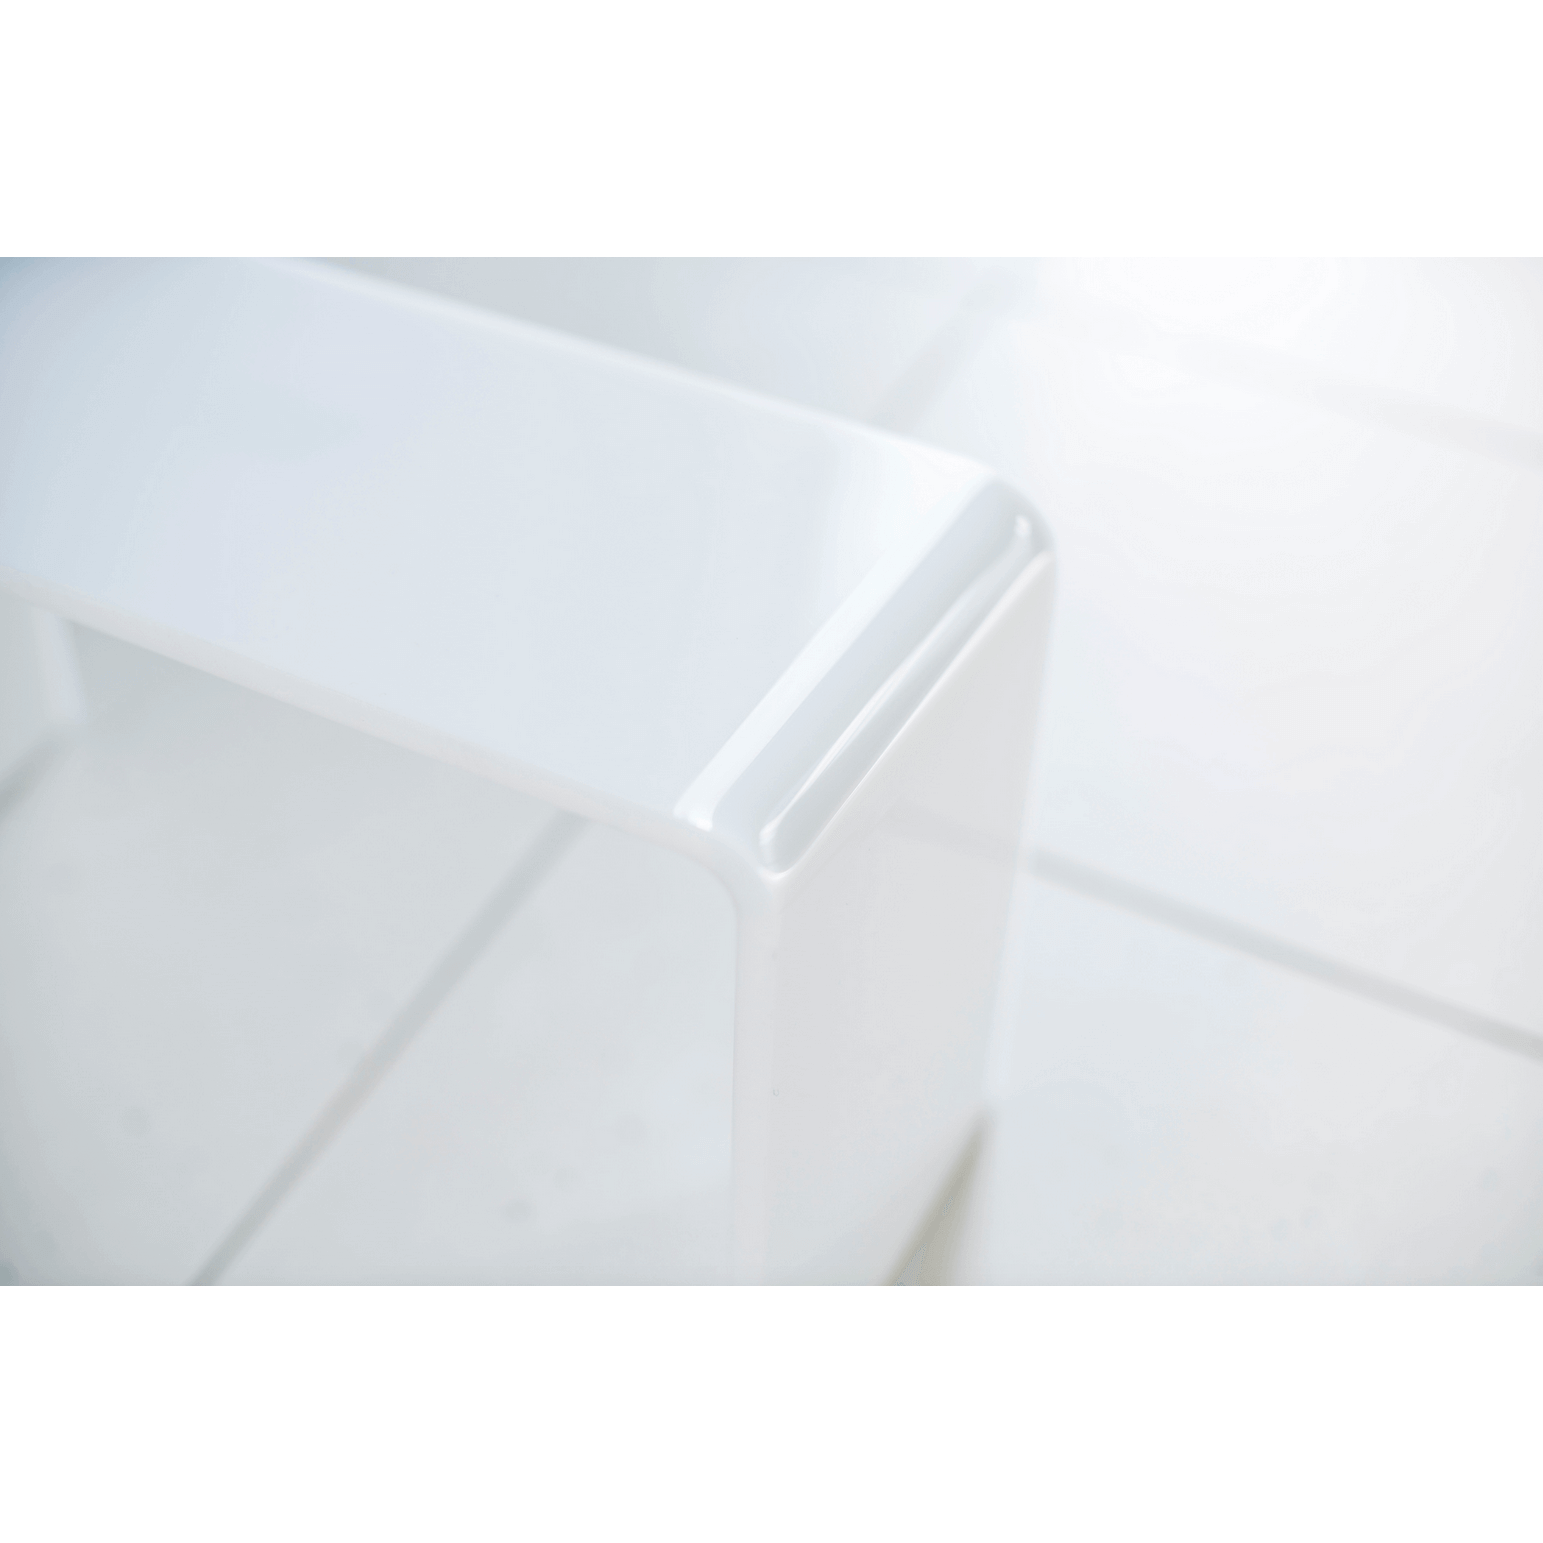 The PROPPR Acer - White Toilet Foot Stool - top angled view